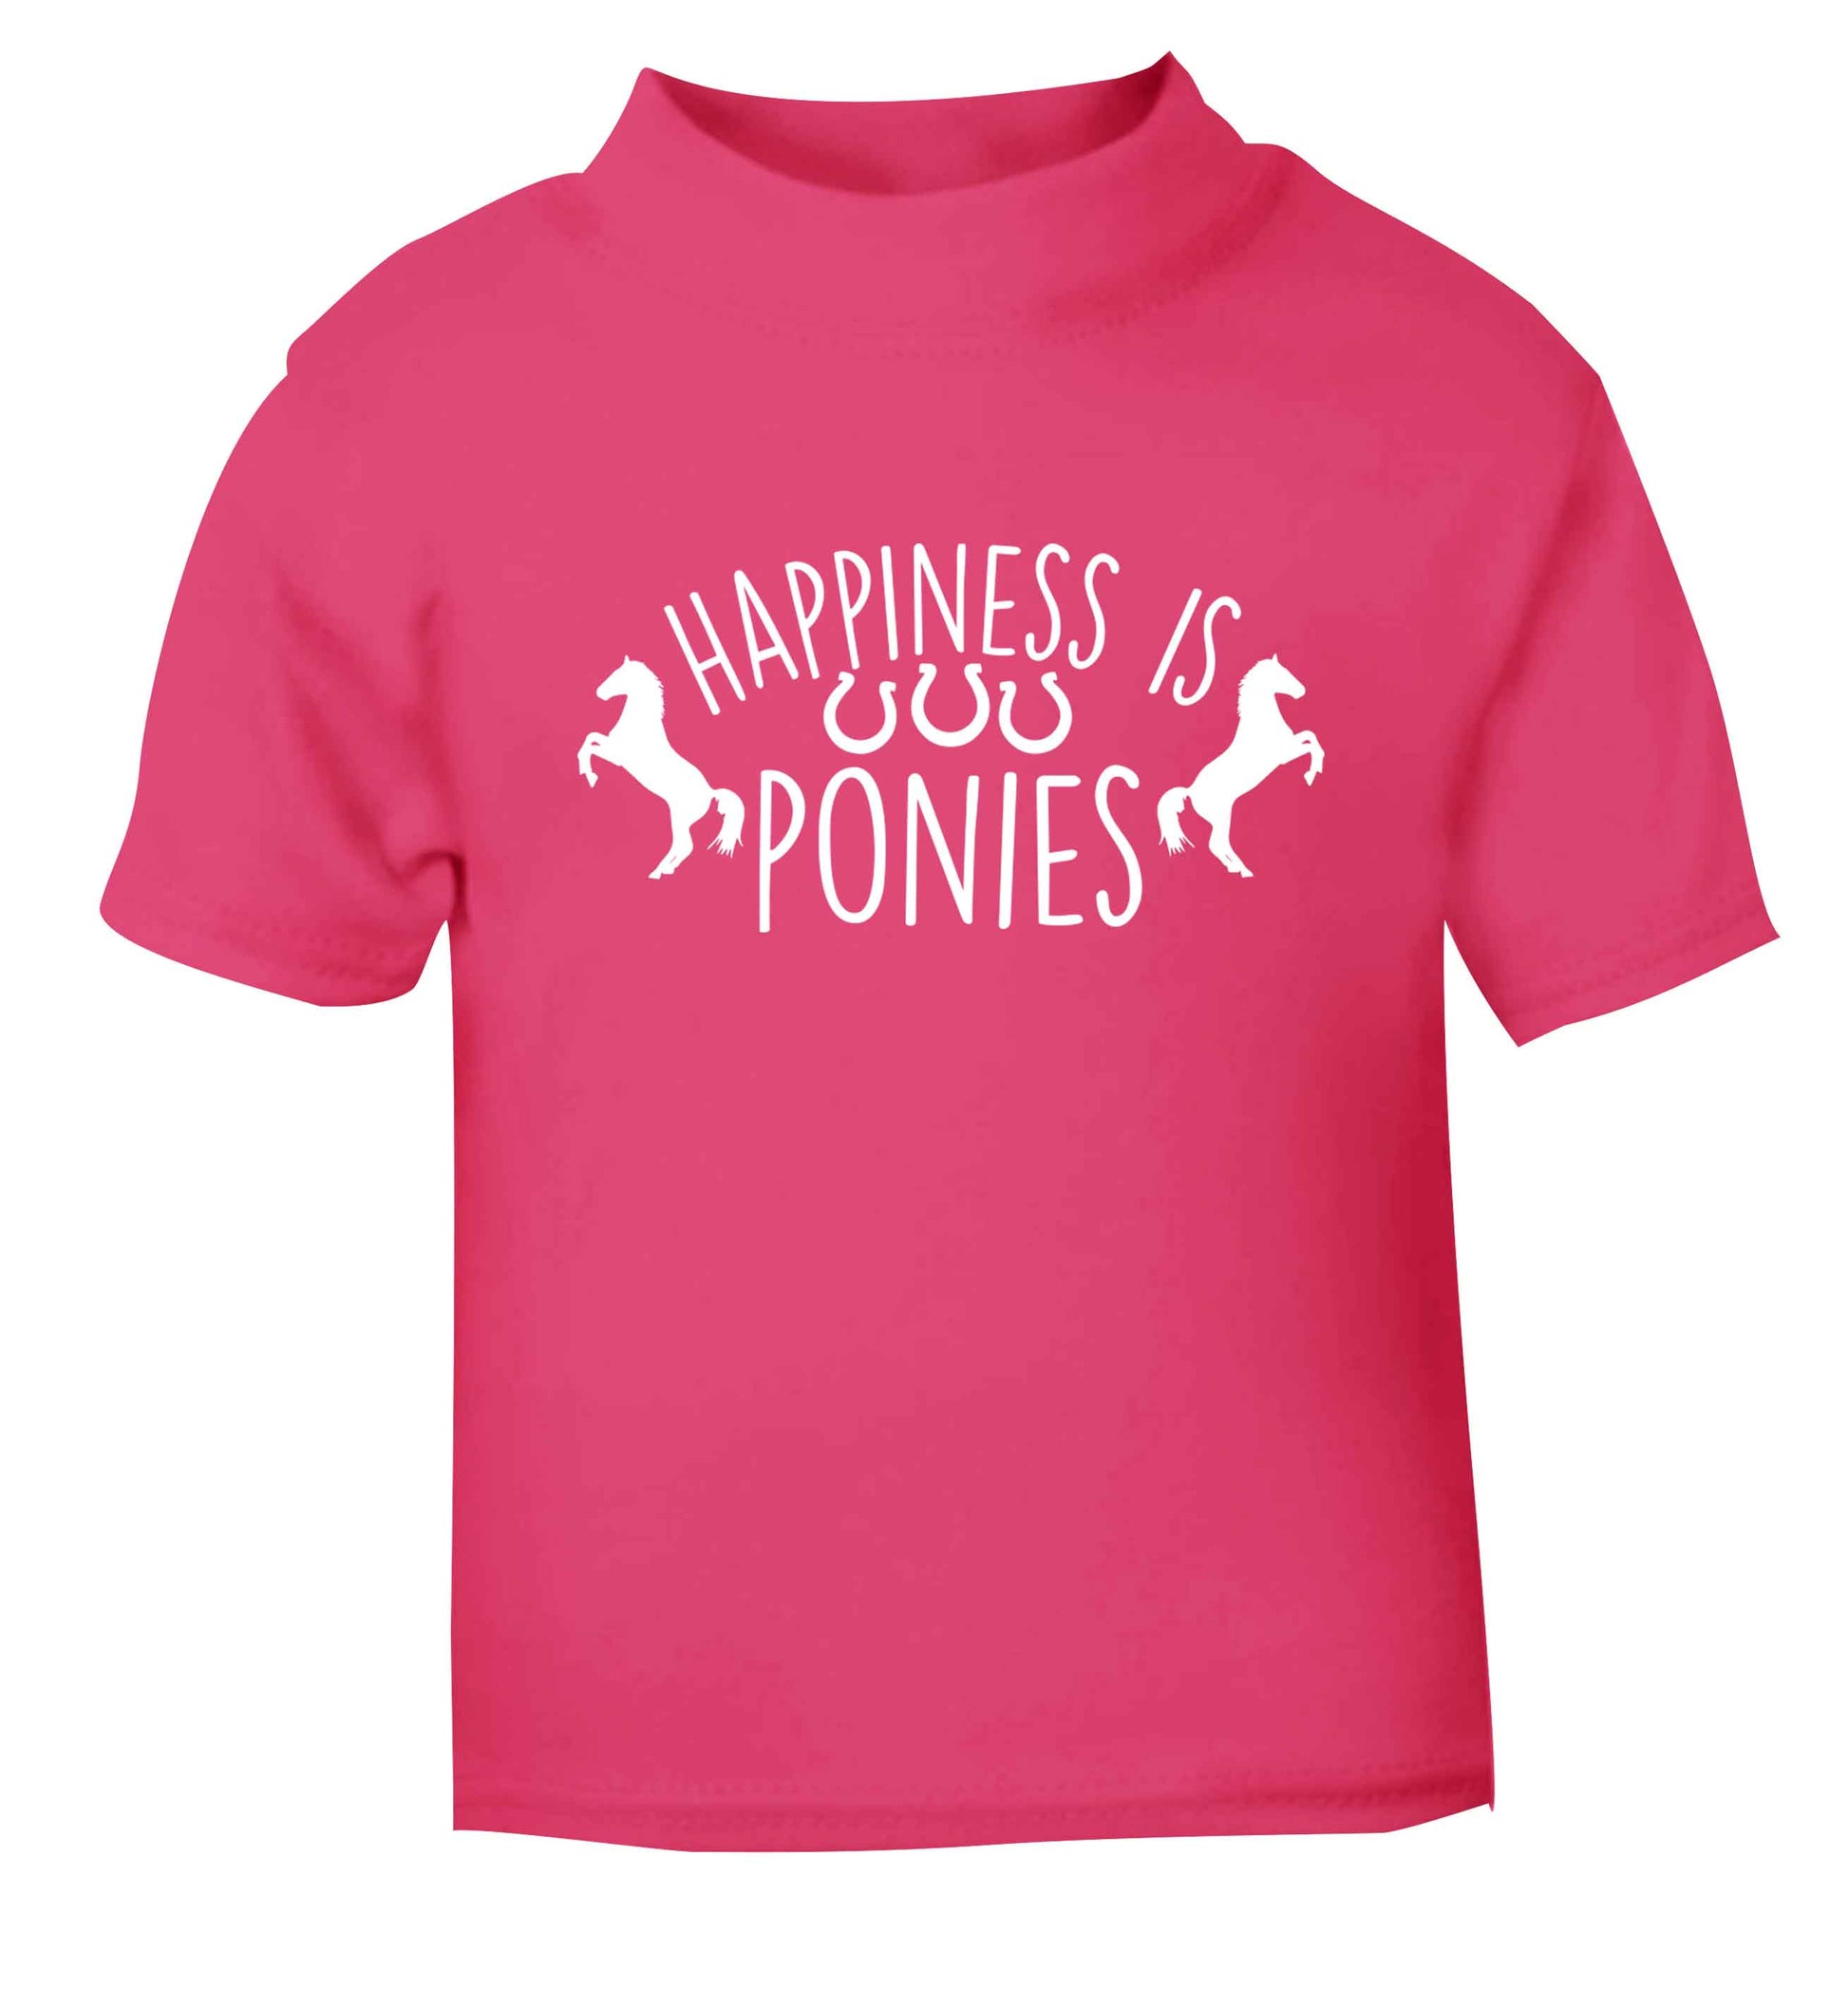 Happiness is ponies pink baby toddler Tshirt 2 Years